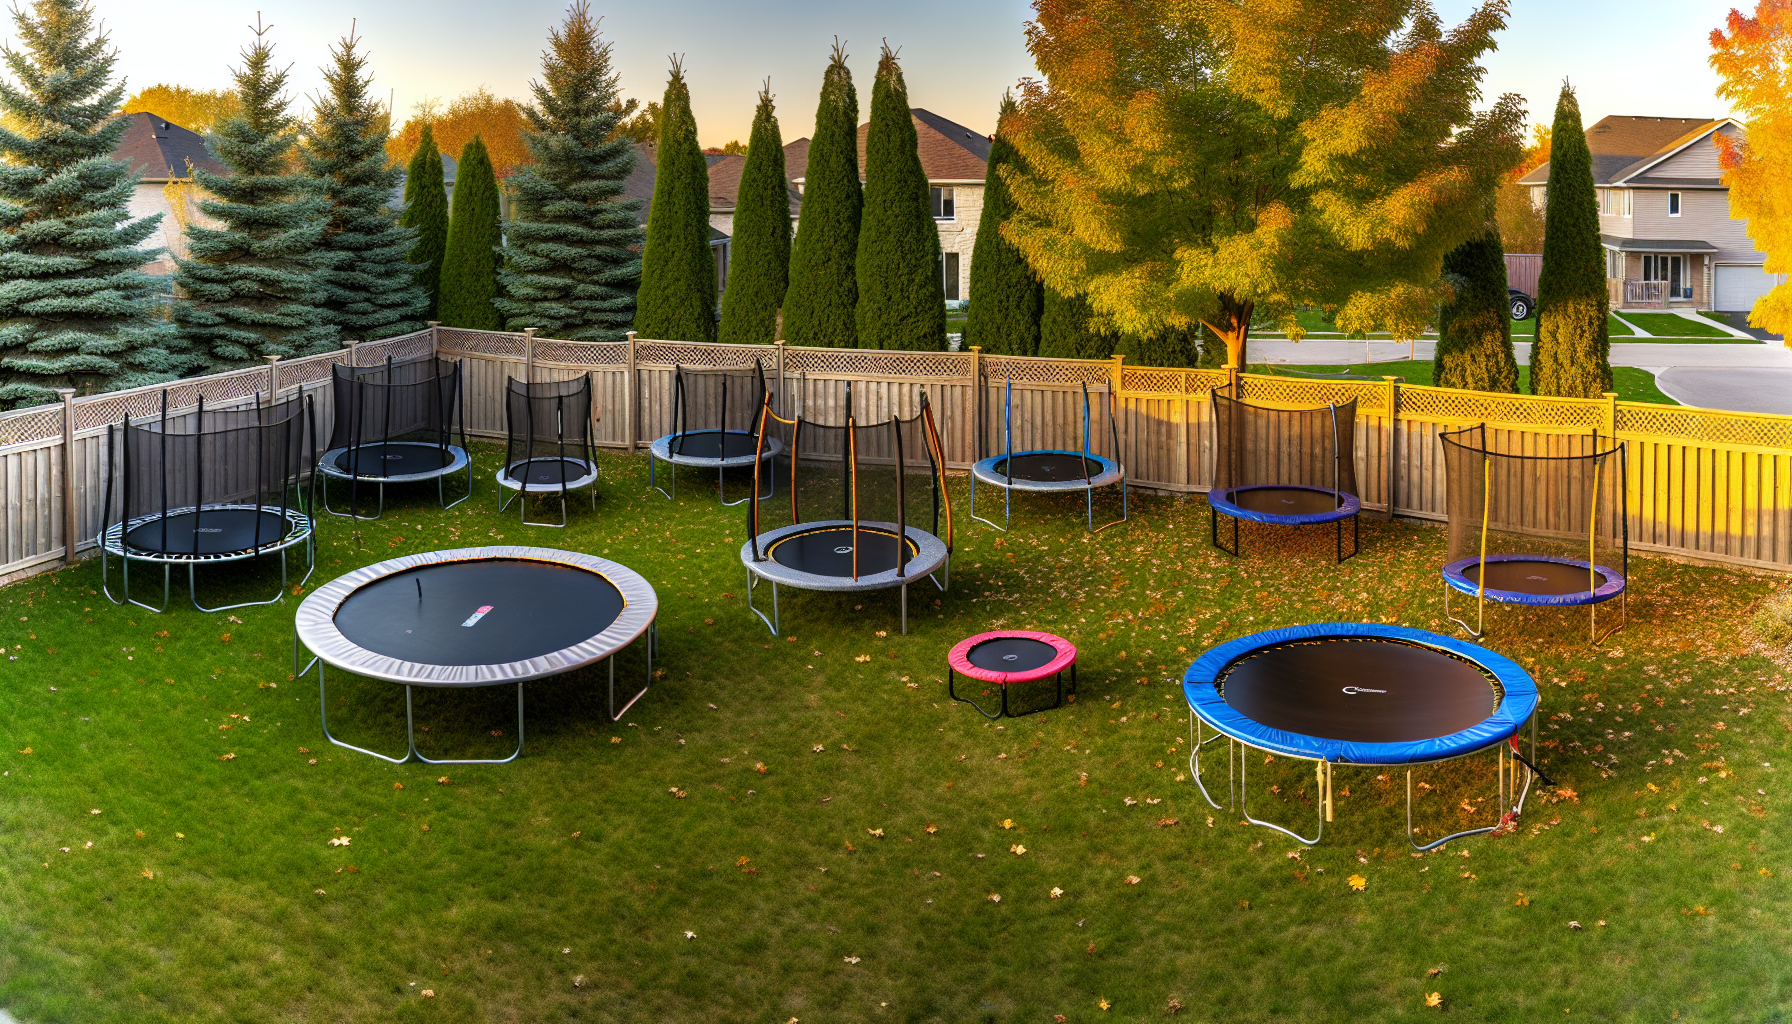 Various trampolines in a backyard setting